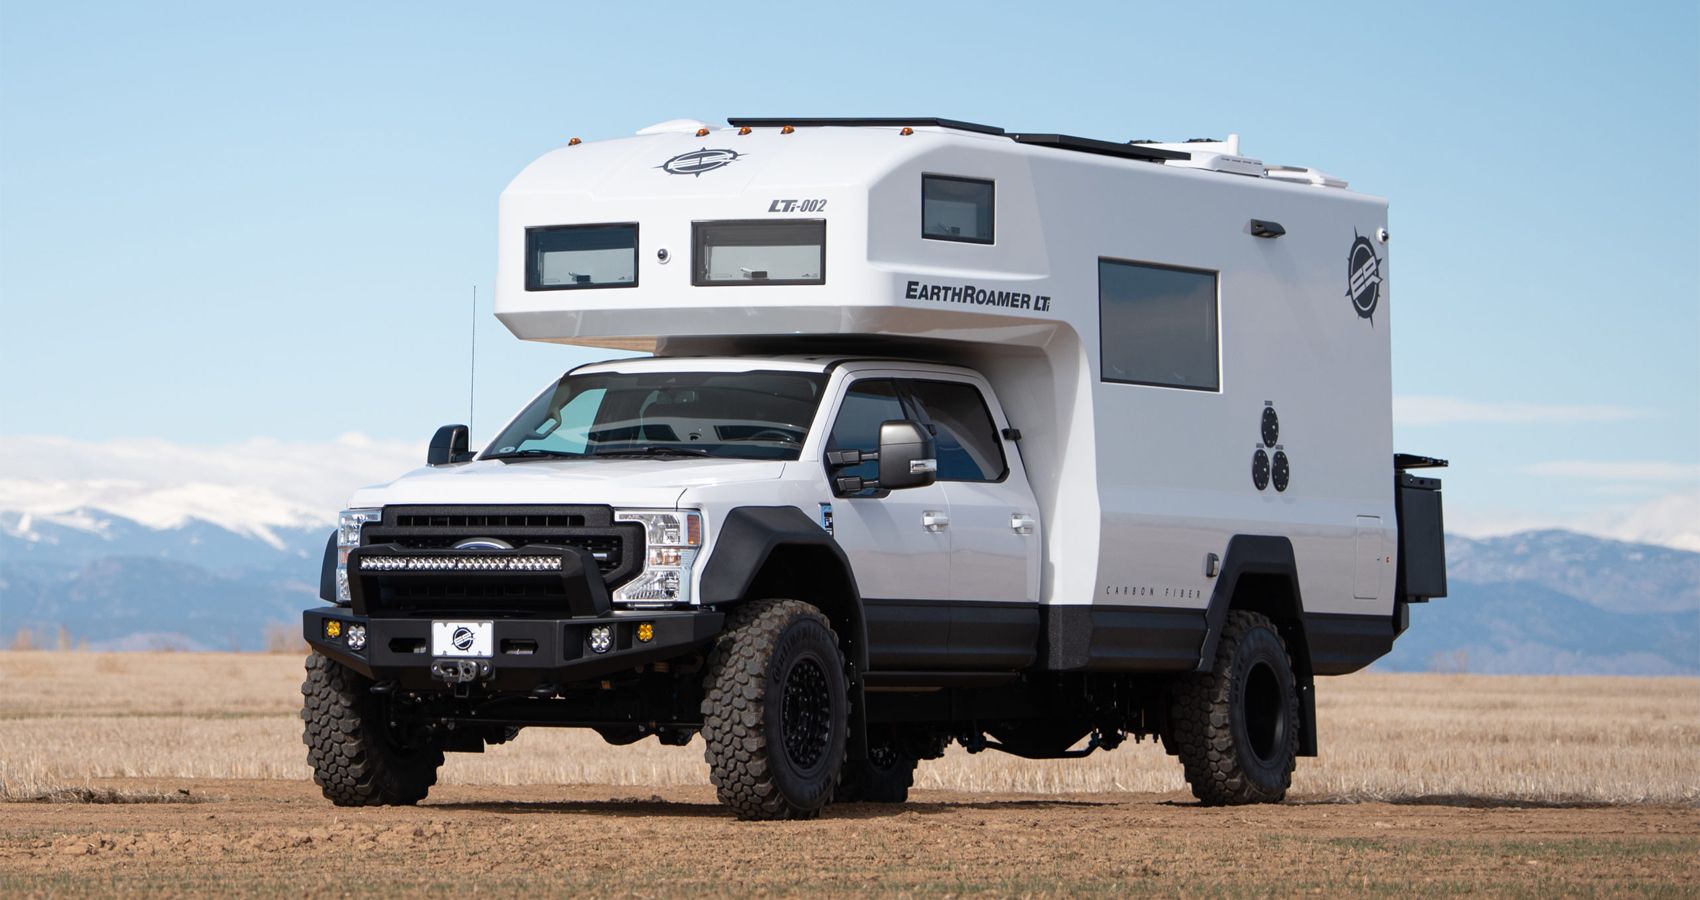 Here’s Why The Carbon-Fiber EarthRoamer LTi Is The Coolest RV Money Can Buy